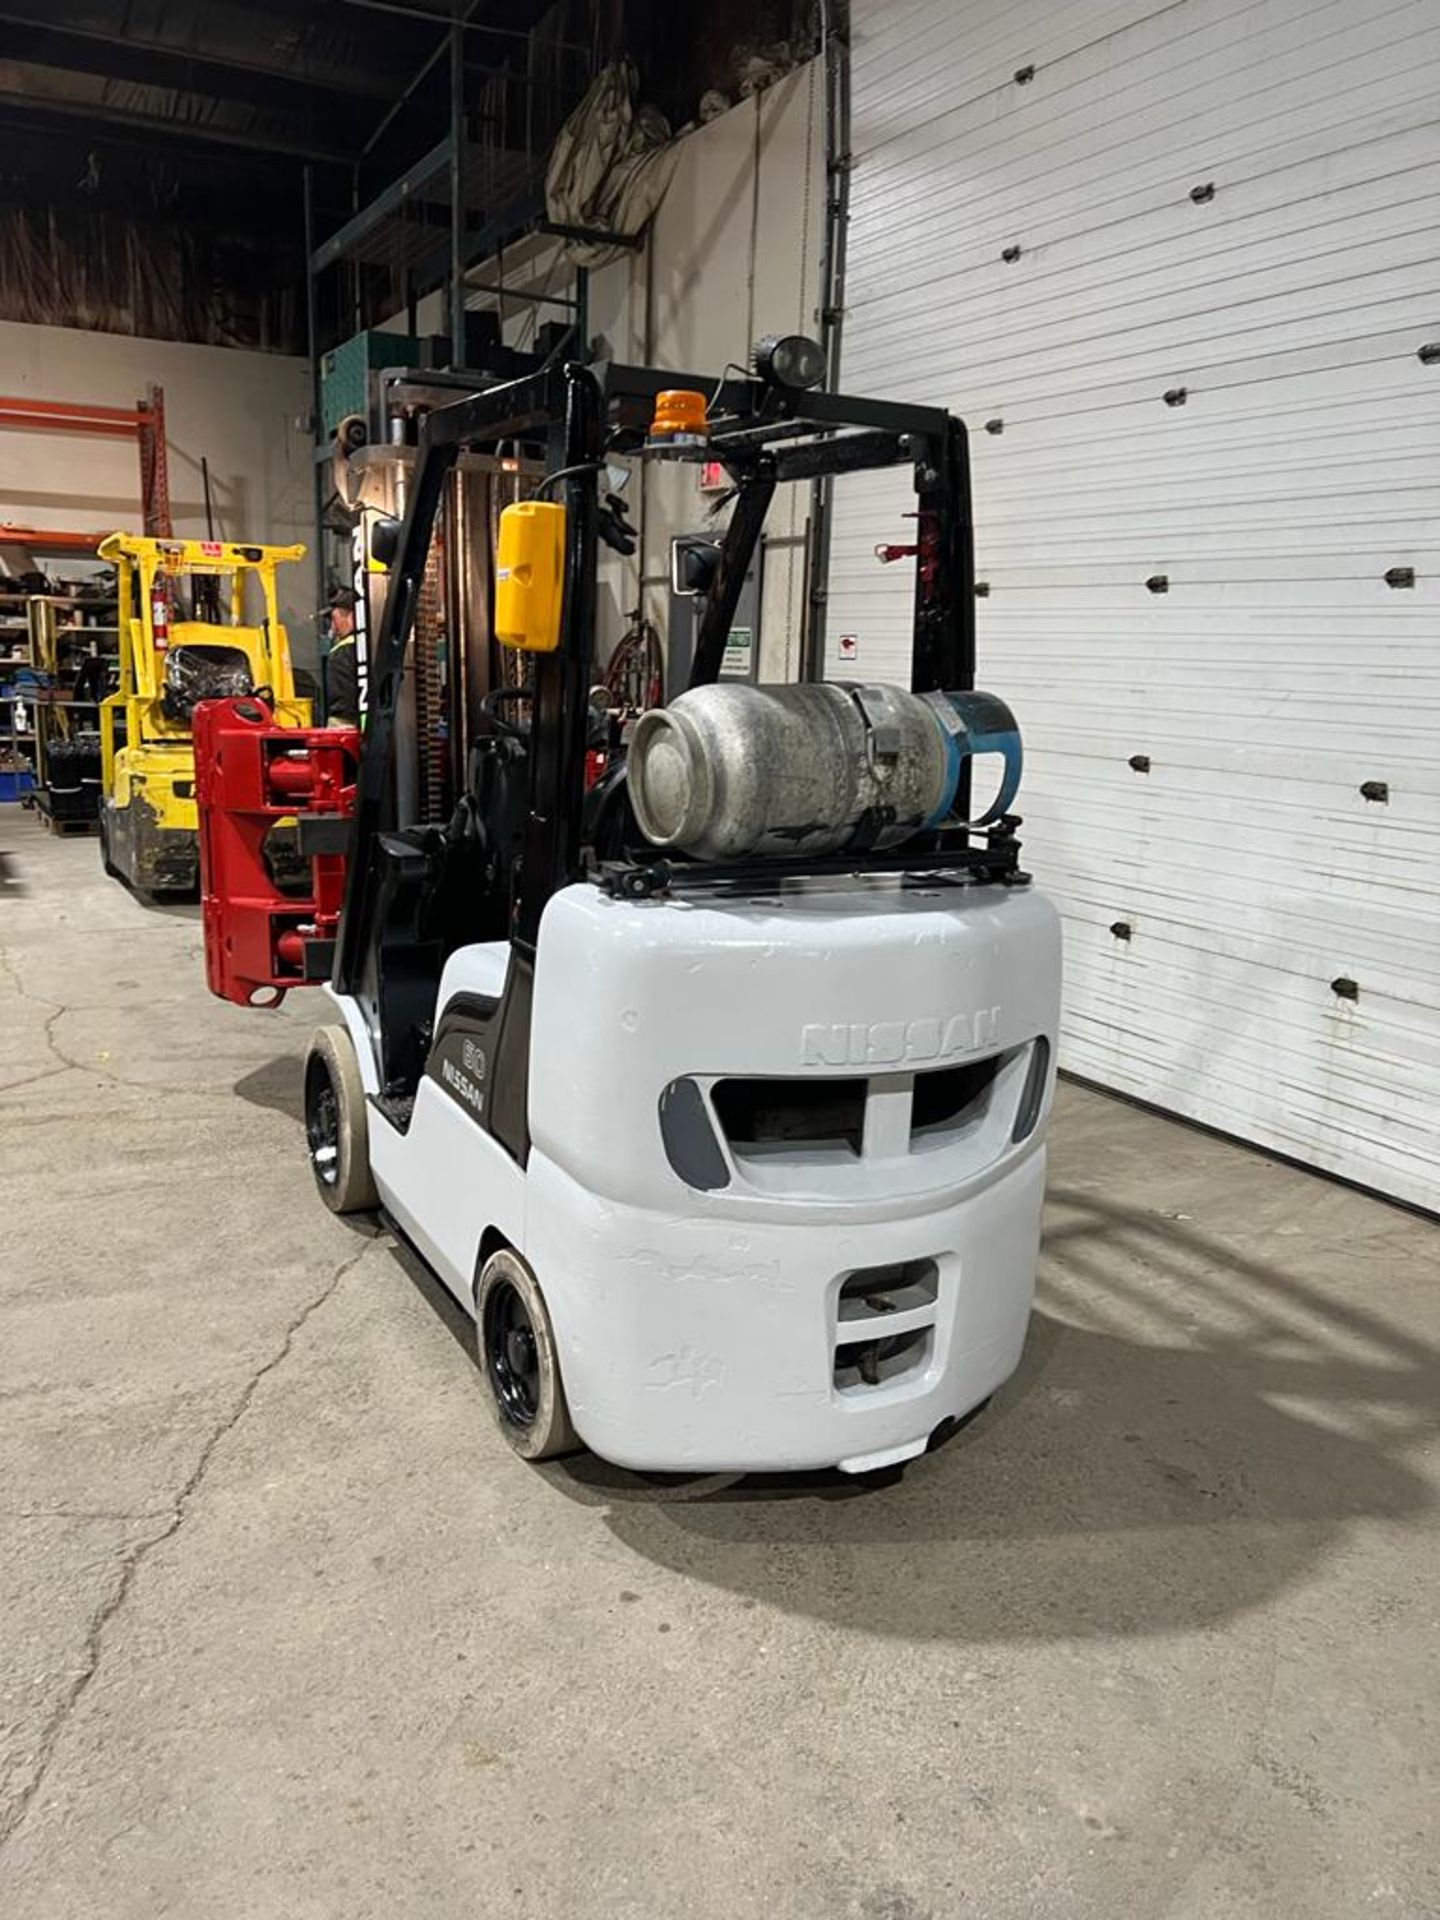 NICE Nissan 6,000lbs Capacity Forklift LPG (propane) with ROTATOR CLAMP Attachament - FREE - Image 3 of 5